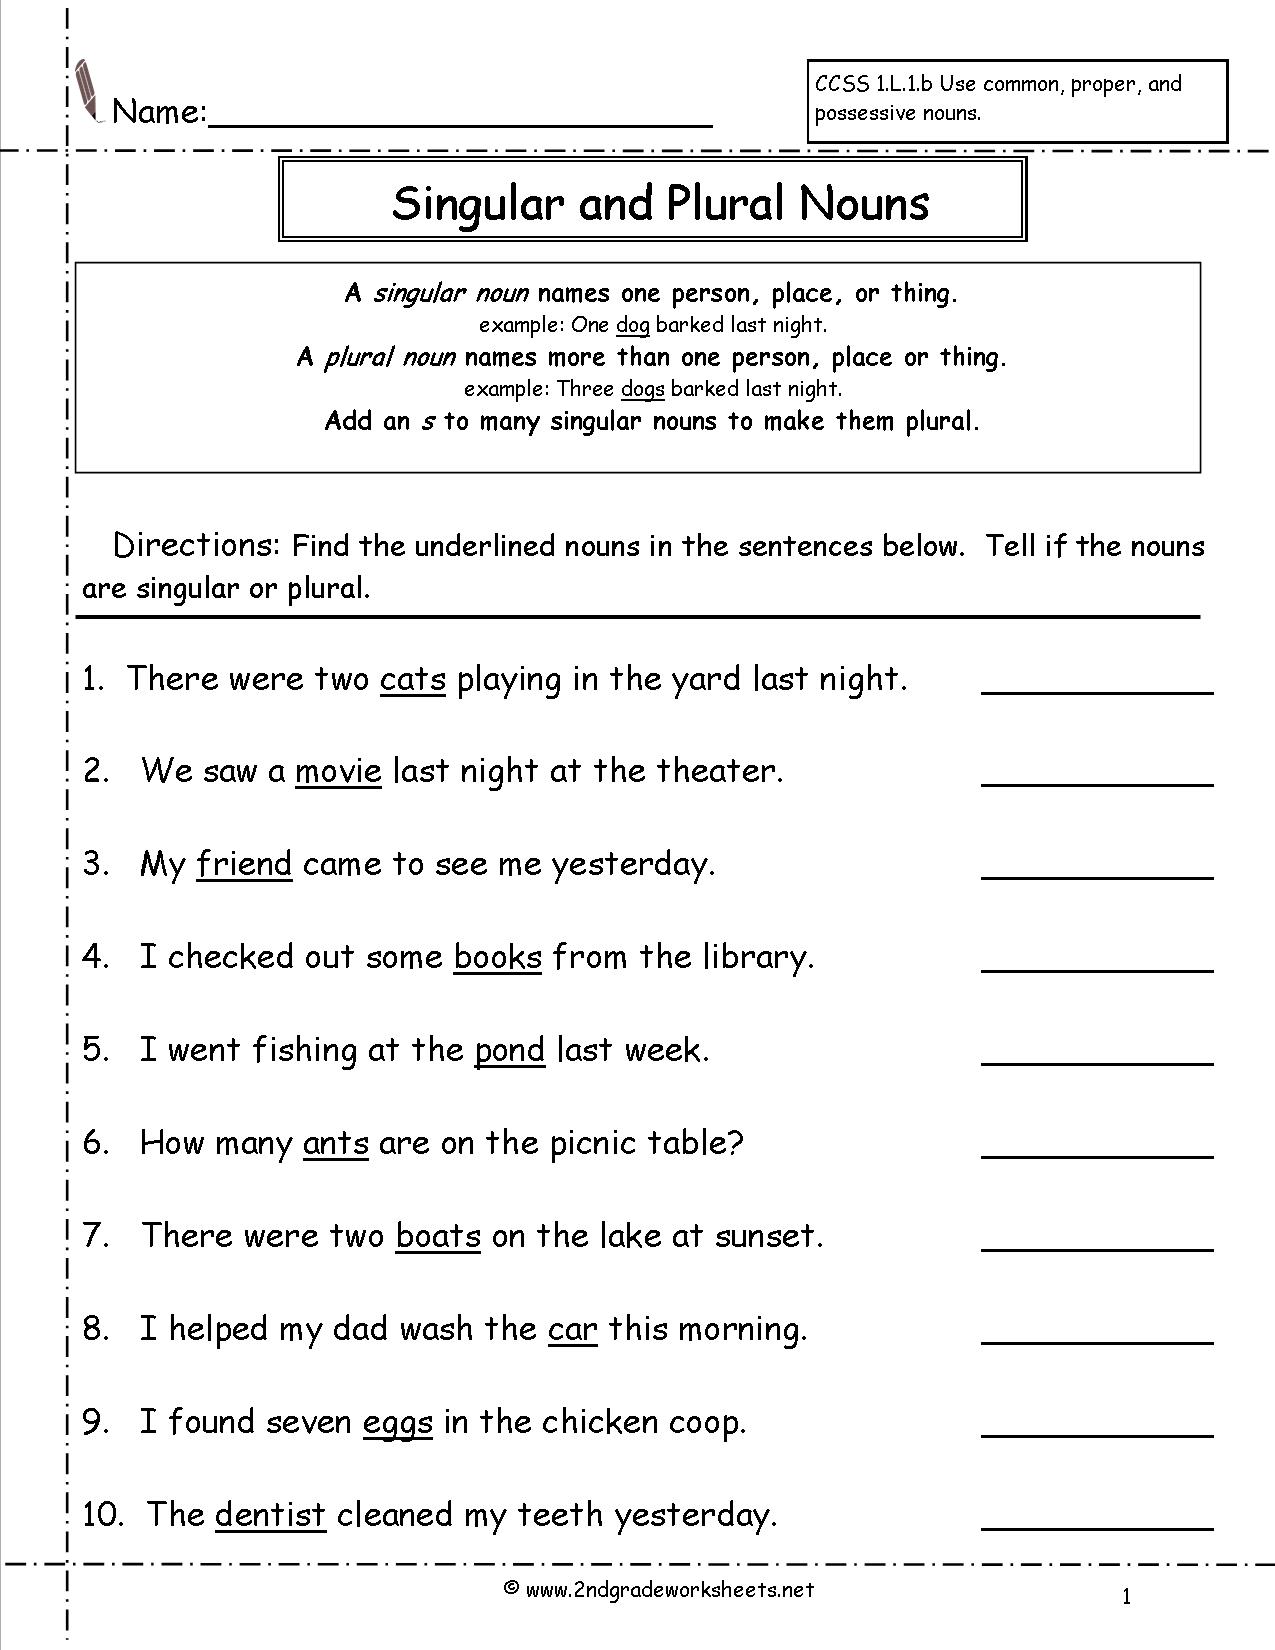 Singular And Plural Nouns Worksheet For Grade 3 With Answers